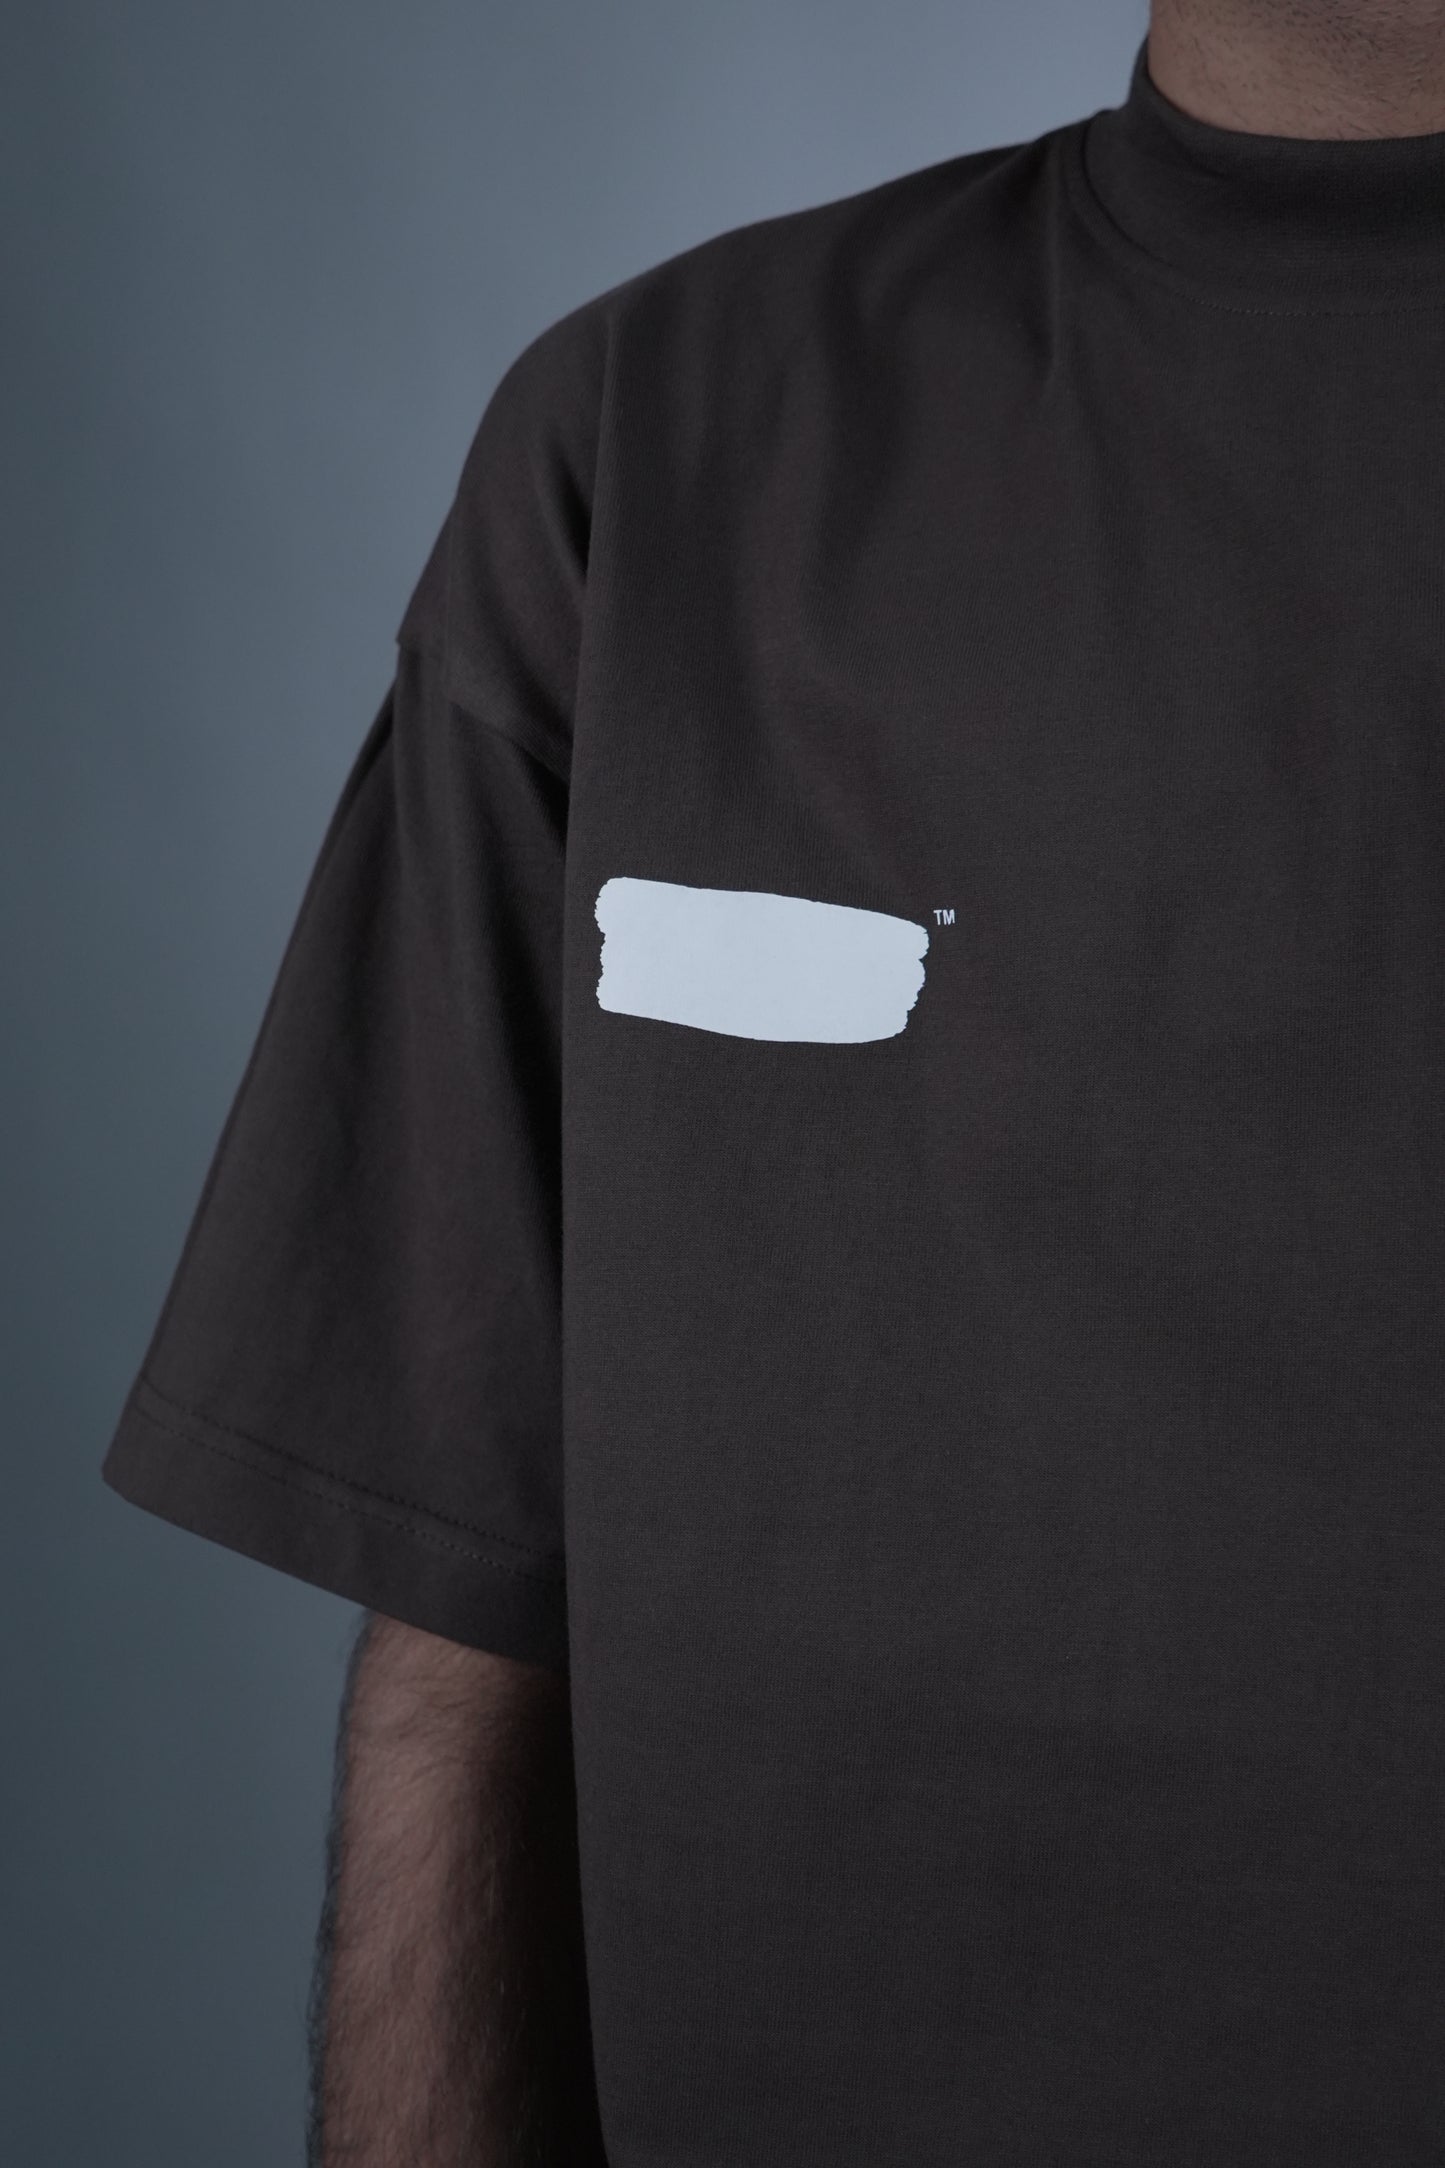 Close-up of the 'Prisoner of Mind' T-shirt by Disorder of Creation, featuring a white rectangular logo on the right chest